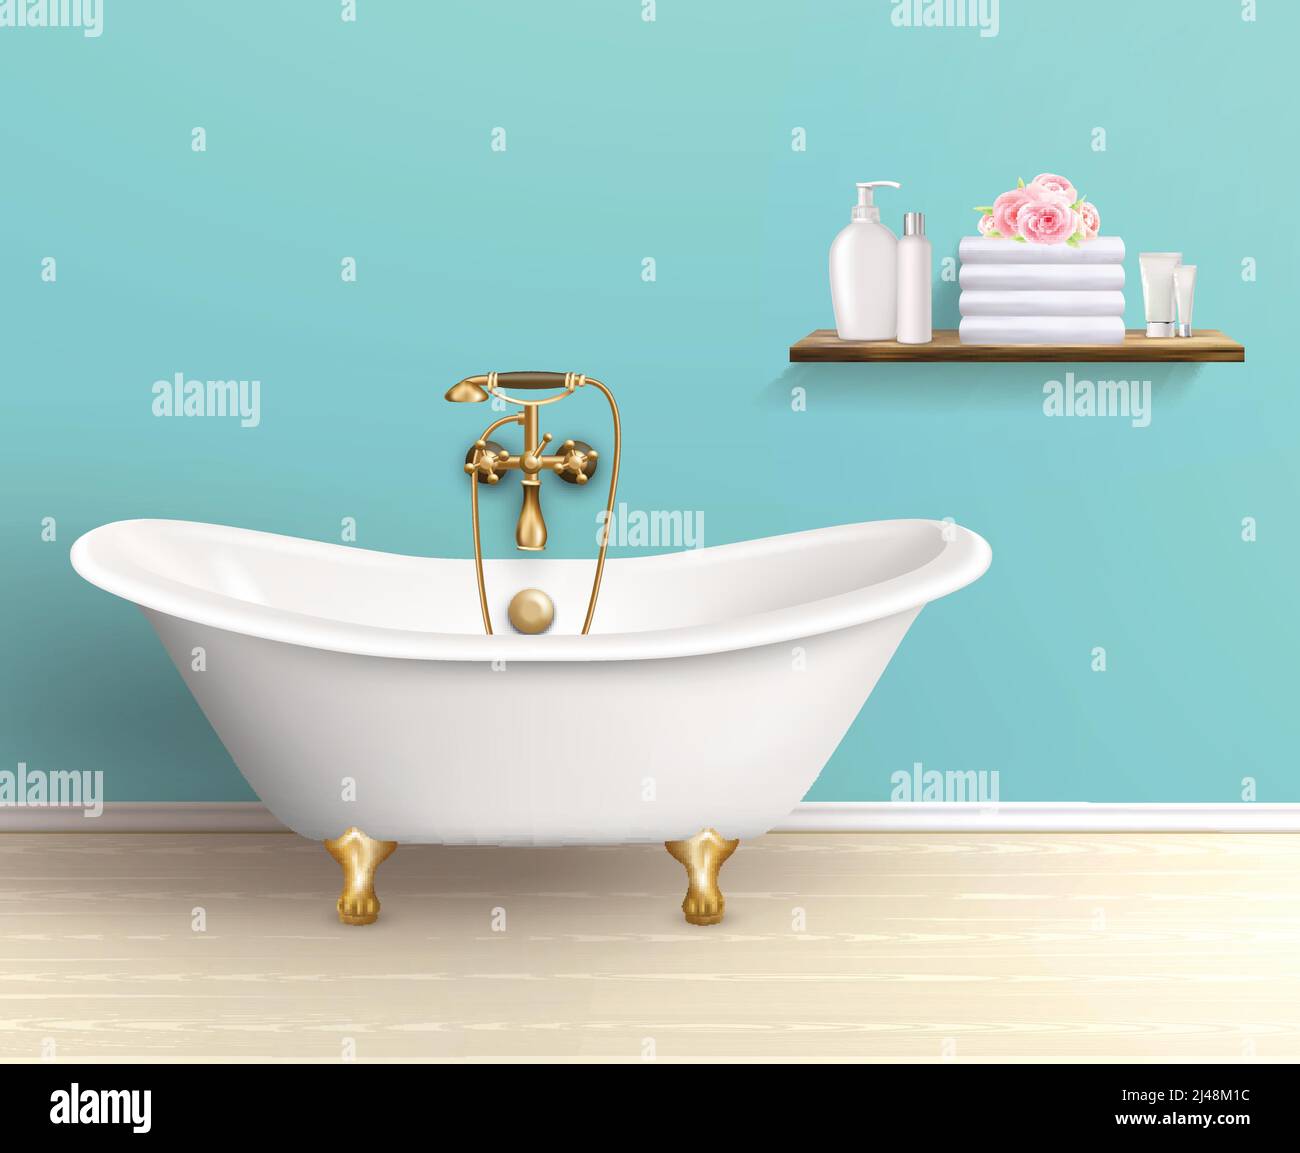 Bathroom interior poster or promo flyer bathtub in the house with blue walls shelf with bath accessories vector illustration Stock Vector